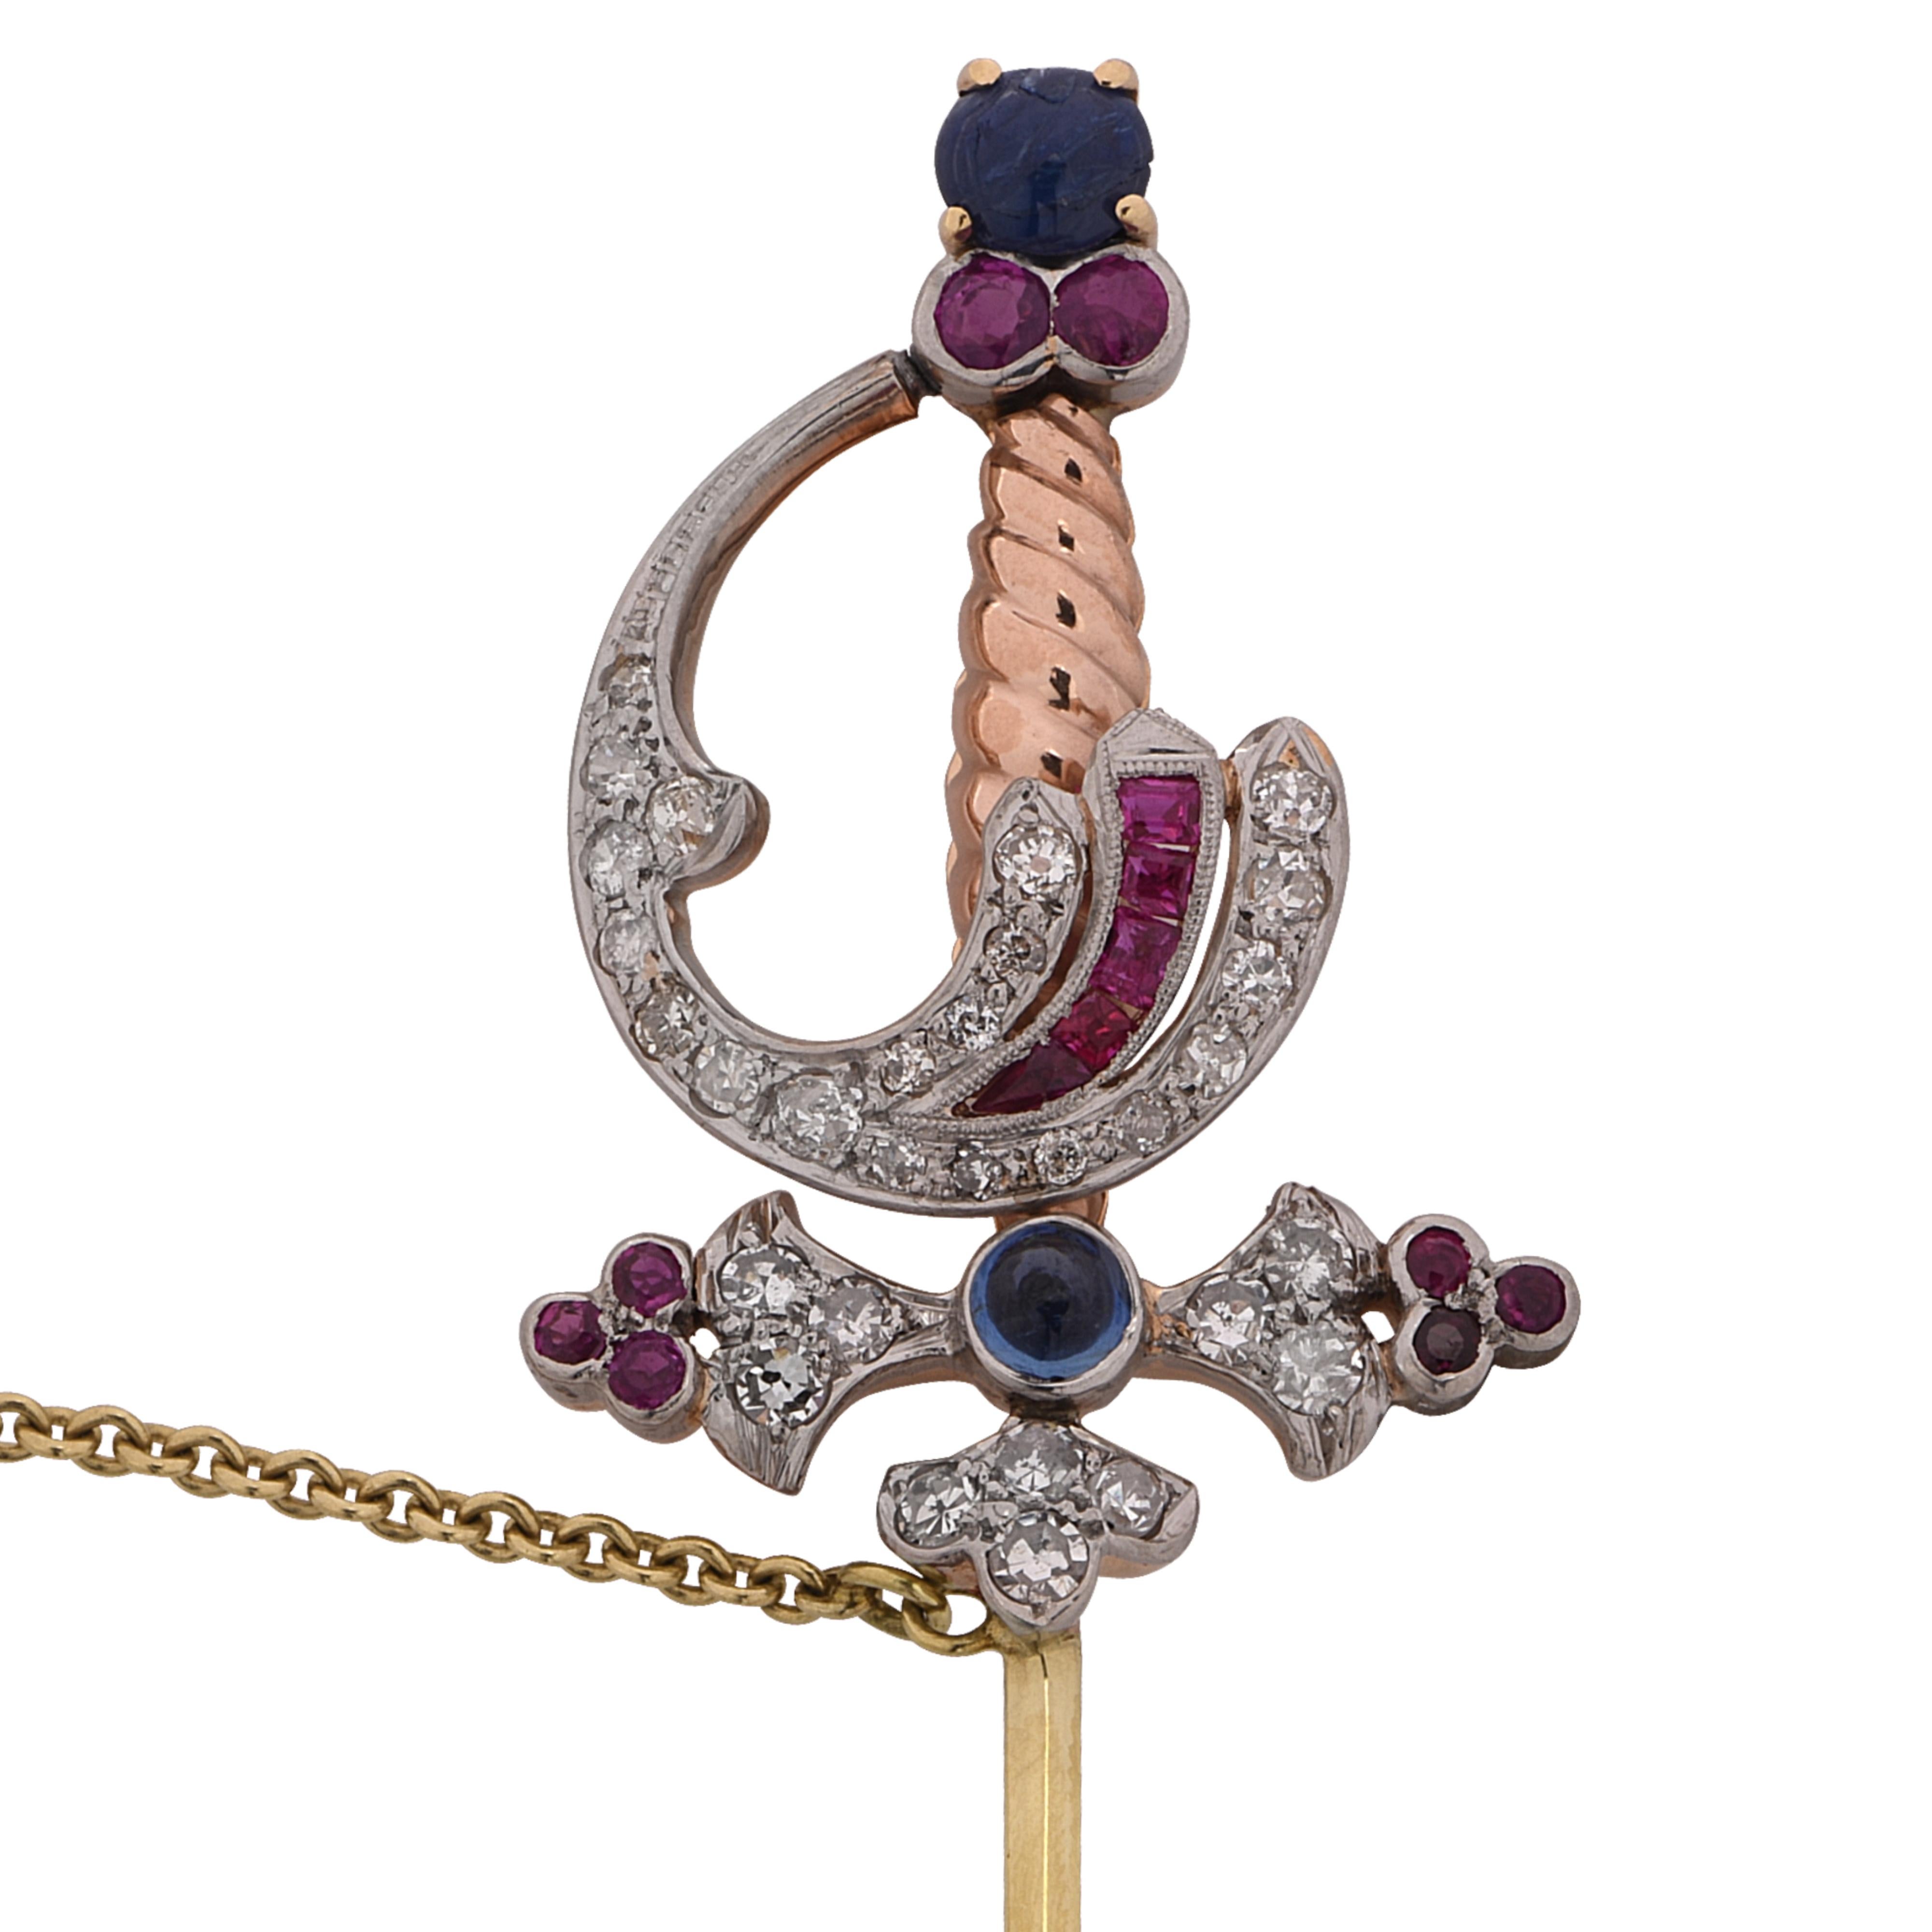 Ornate Victorian jabot brooch pin crafted in yellow, white and rose gold, featuring a sabot sword detailed with 42 European and single cut diamonds weighing approximately 1 carat, and 15 rubies and 2 sapphires weighing approximately .80 carats. This